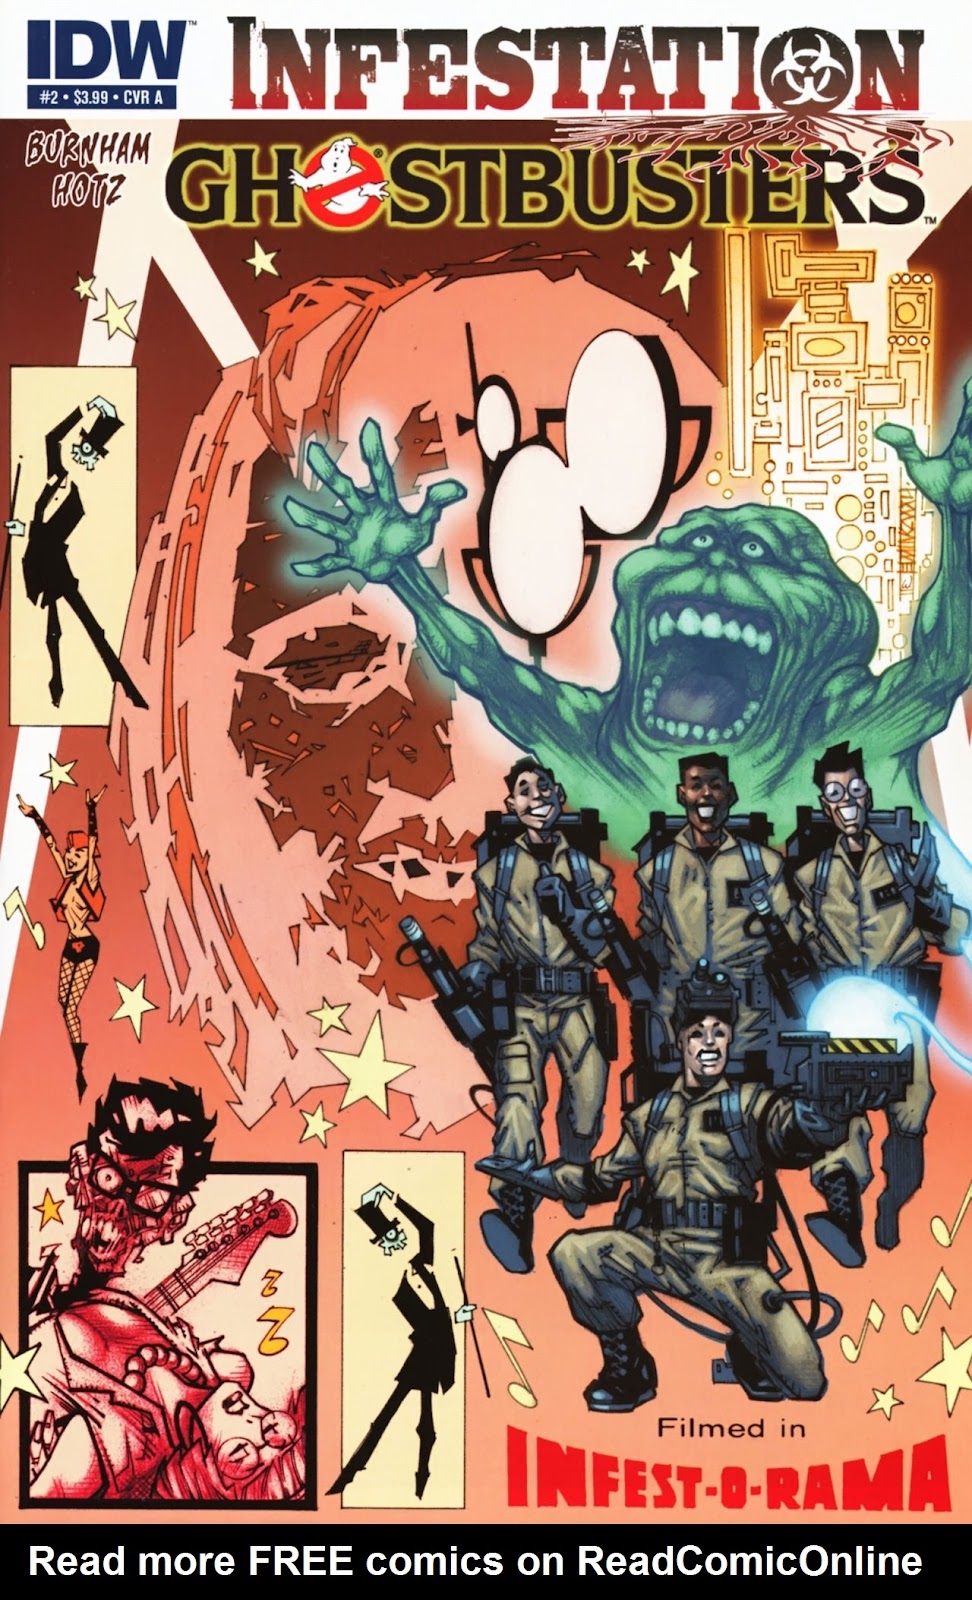 Ghostbusters: Infestation #2 - Read Ghostbusters: Infestation Issue #2  Online